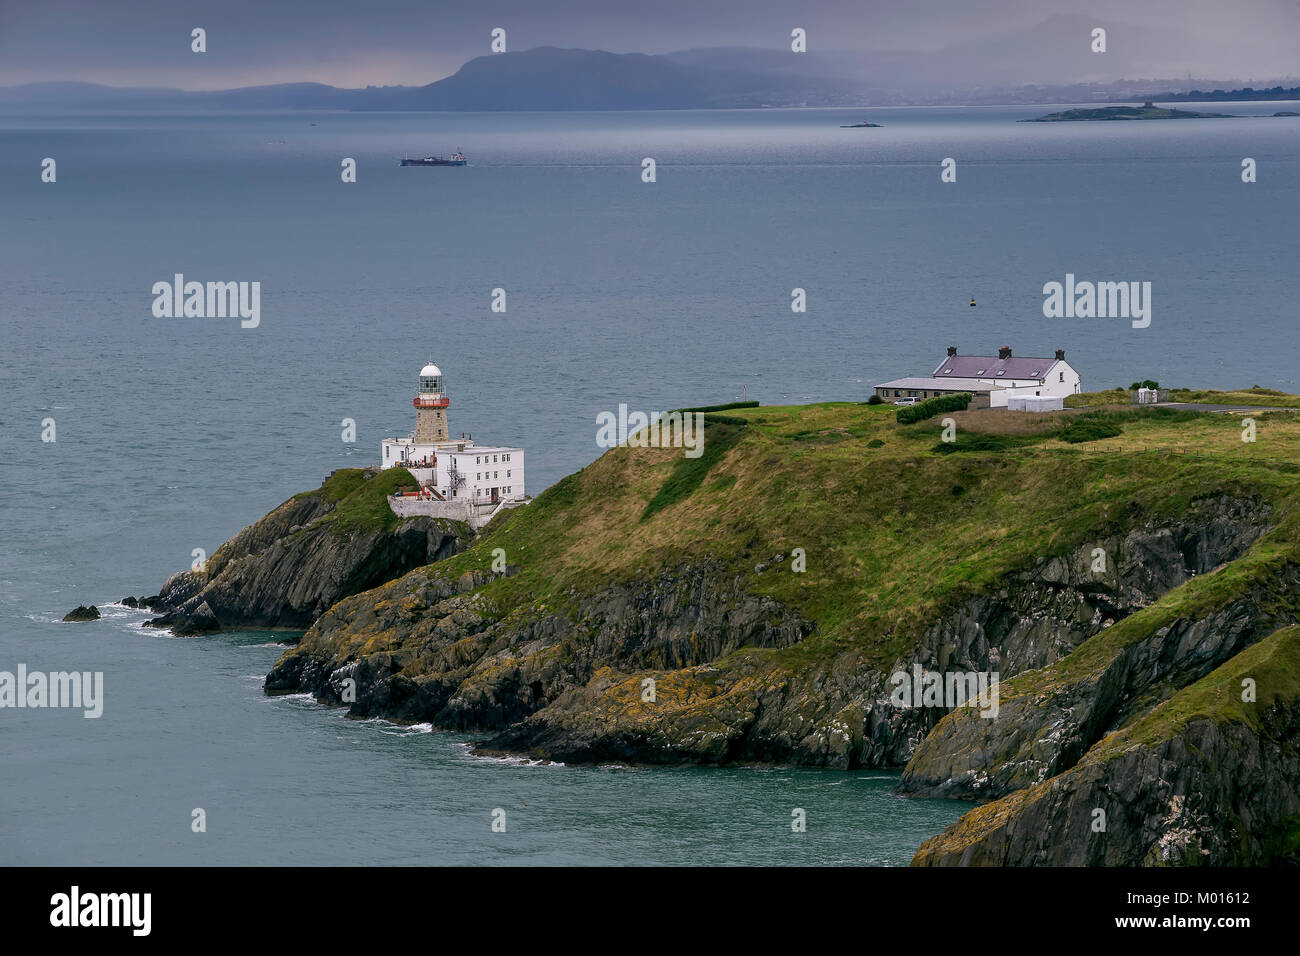 A photograph of the Bailey Lighthouse in Dublin bay with Dalkey Islands across the Bay and the Wicklow mountains in the Mist beyond that. Stock Photo